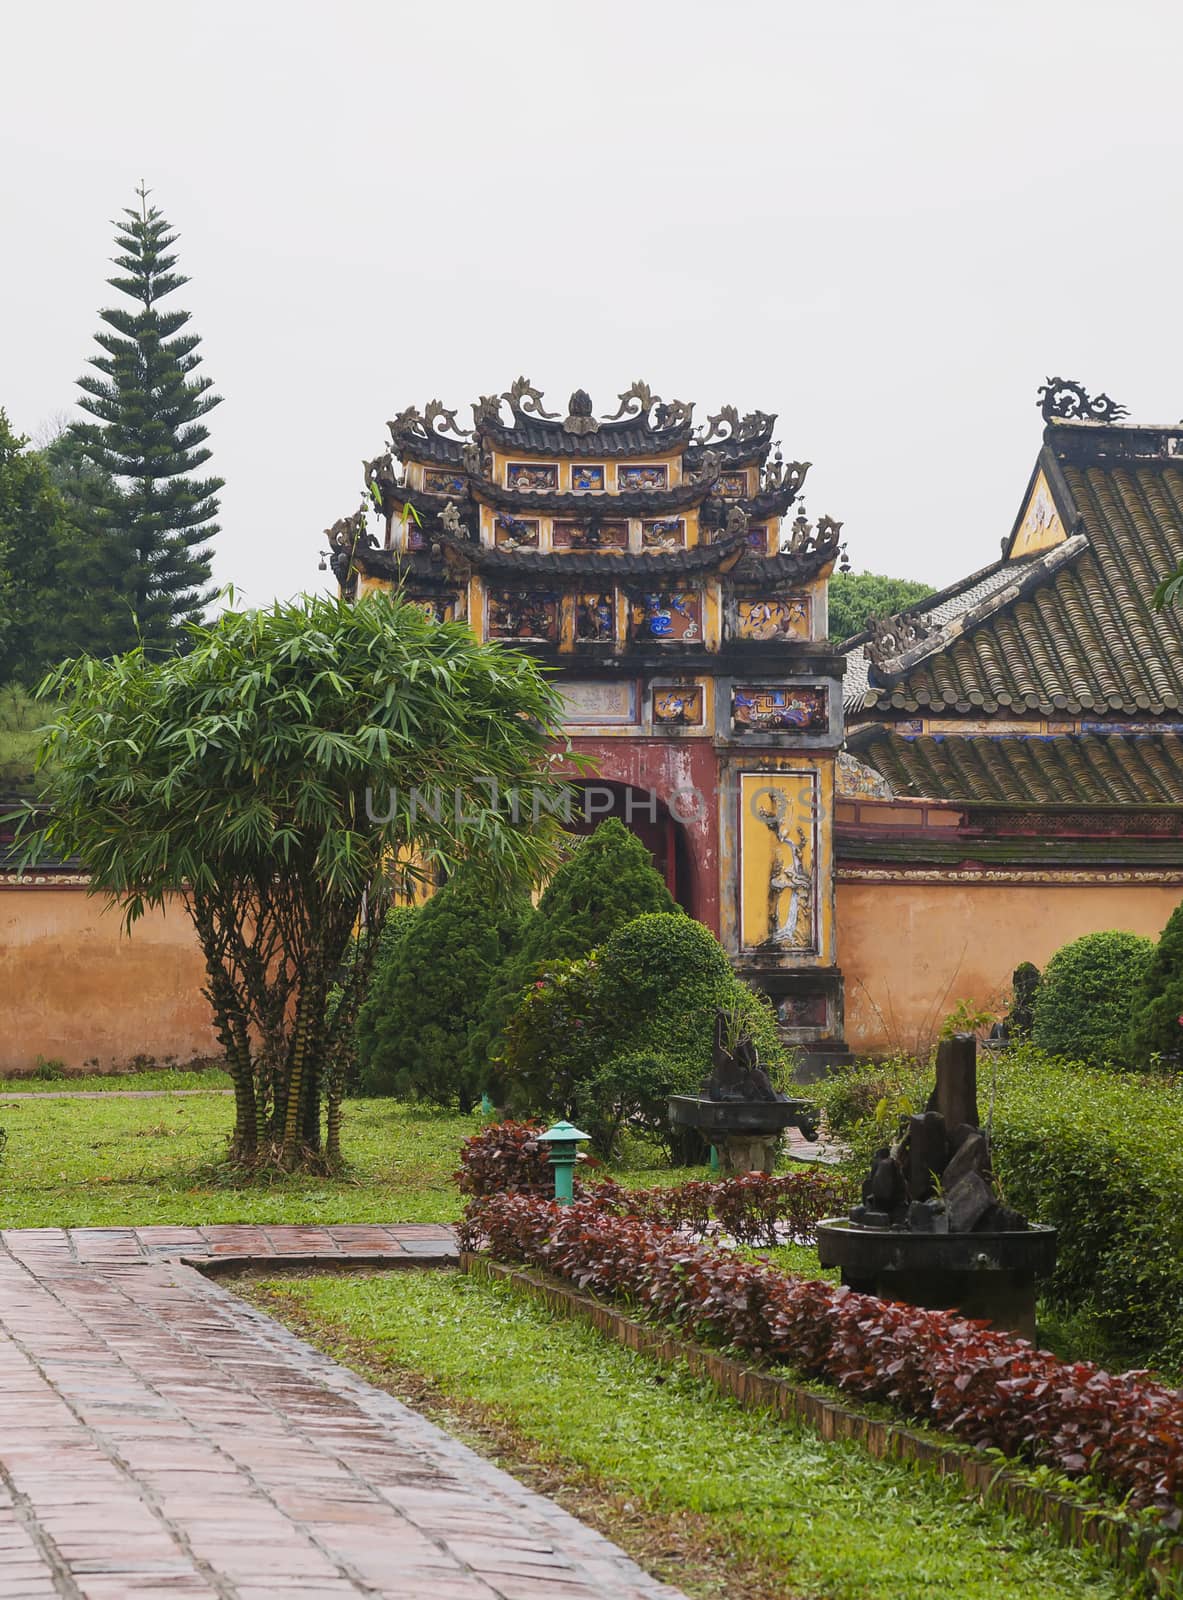 The old gate to the Citadel of the Imperial City in Hue, Vietnam